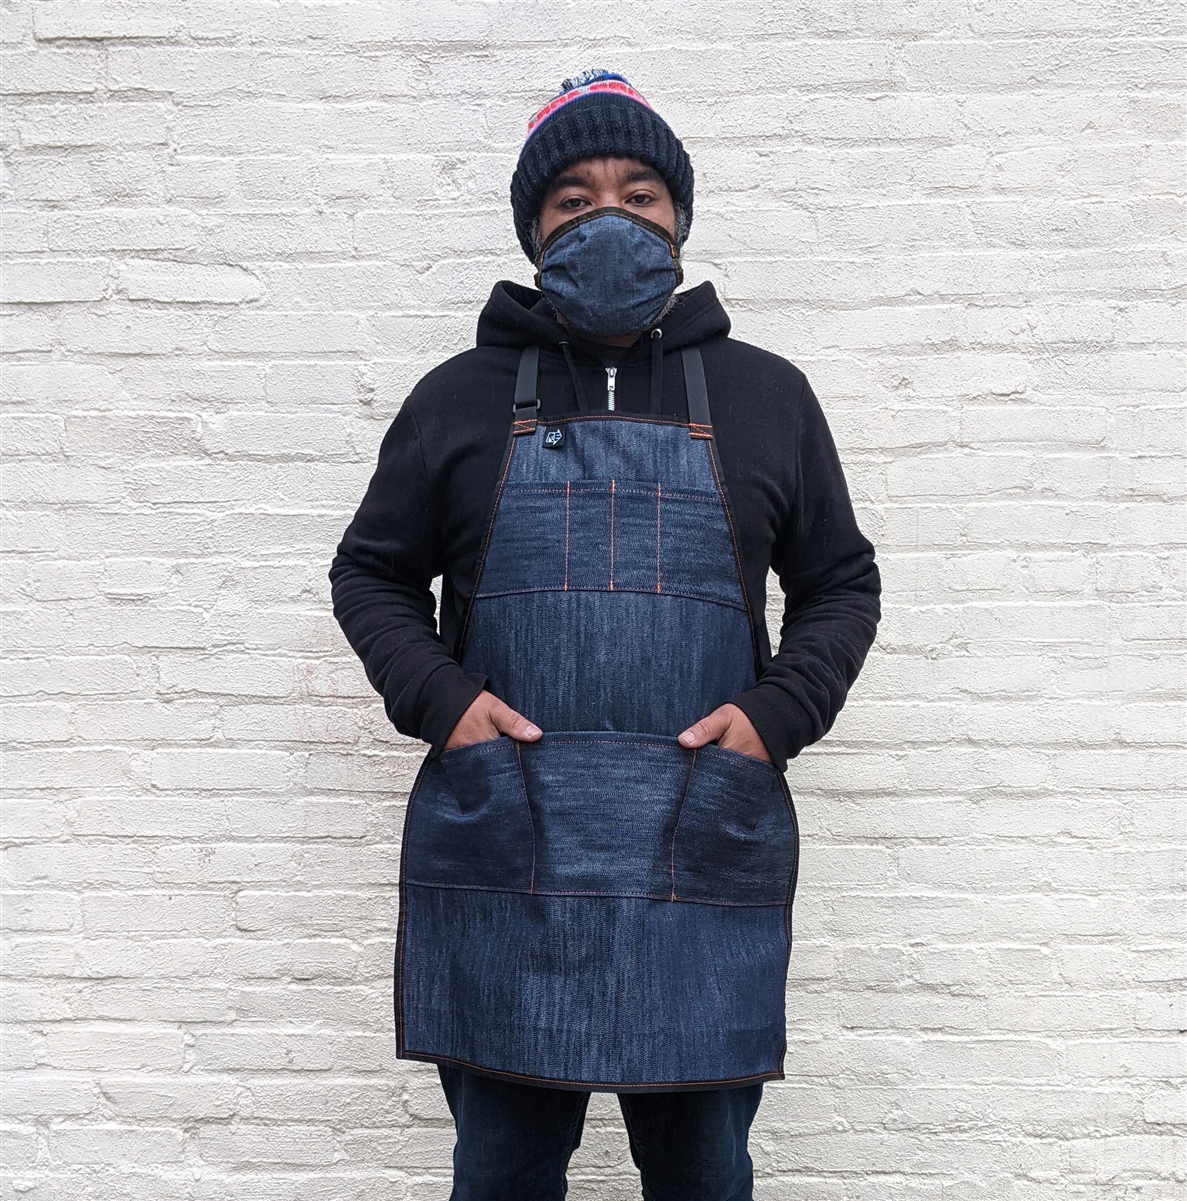 How to Make a Denim Work Apron from Thrifted Jeans • Adirondack Girl @ Heart